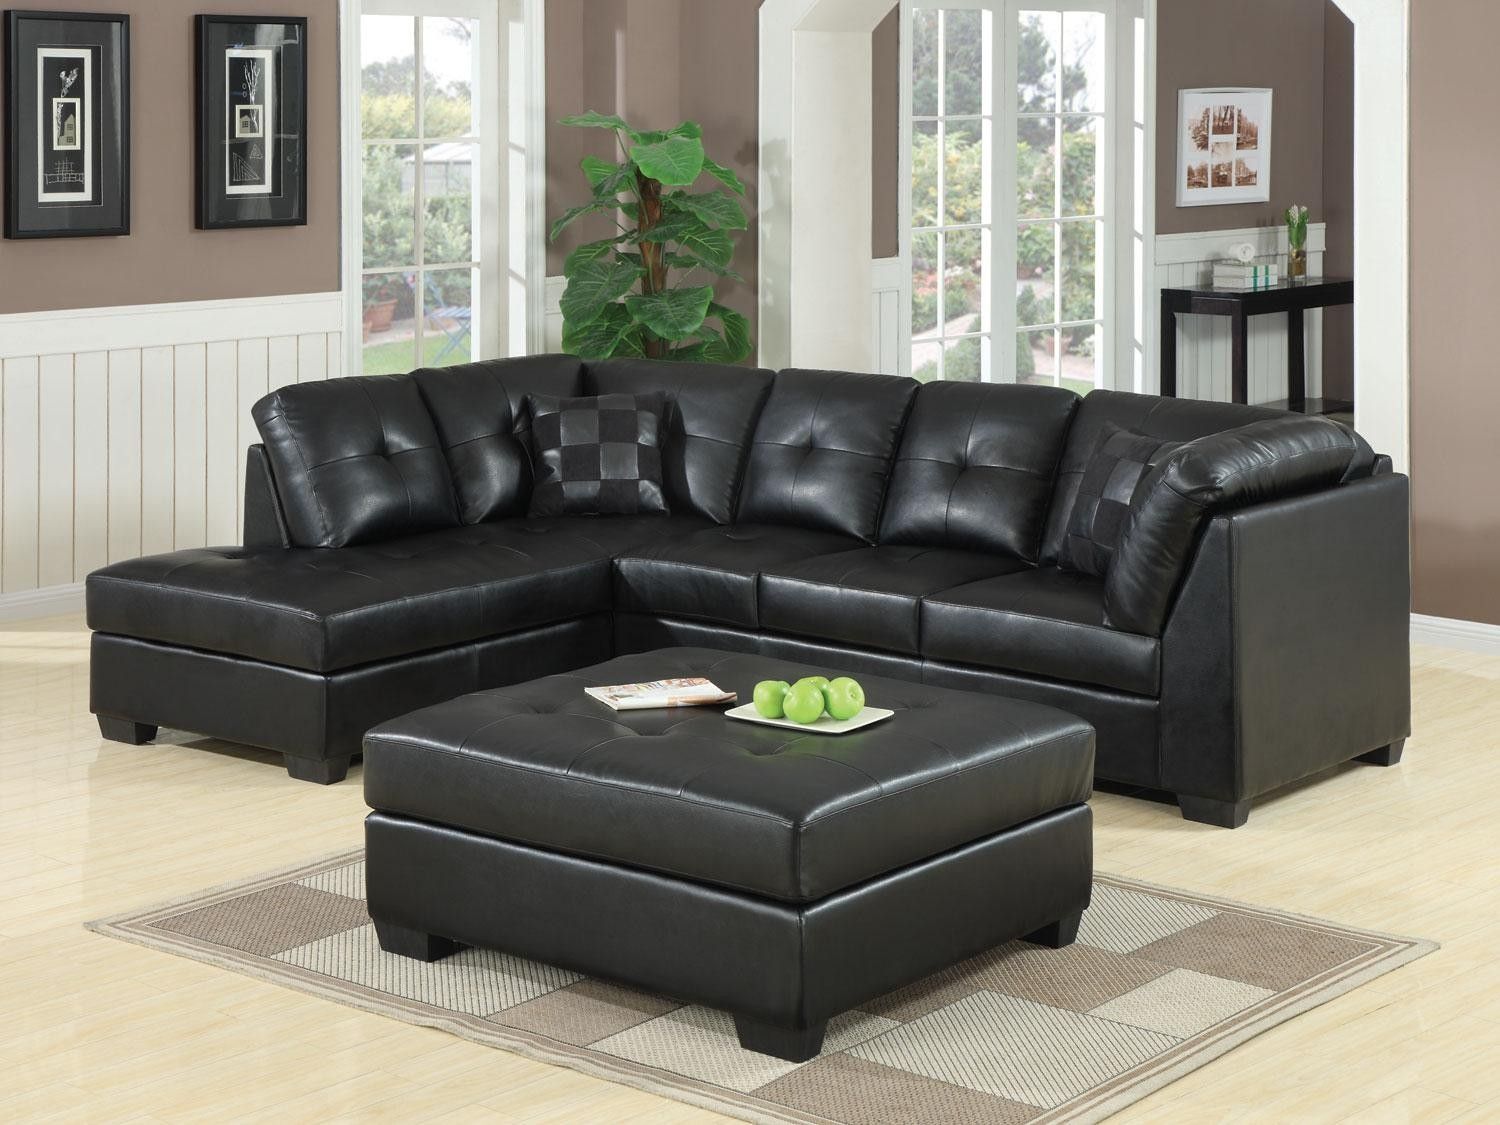 Black Leather Sectional Sofa With Chaise Hereo Sofa Intended For Contemporary Black Leather Sectional Sofa Left Side Chaise (View 6 of 12)